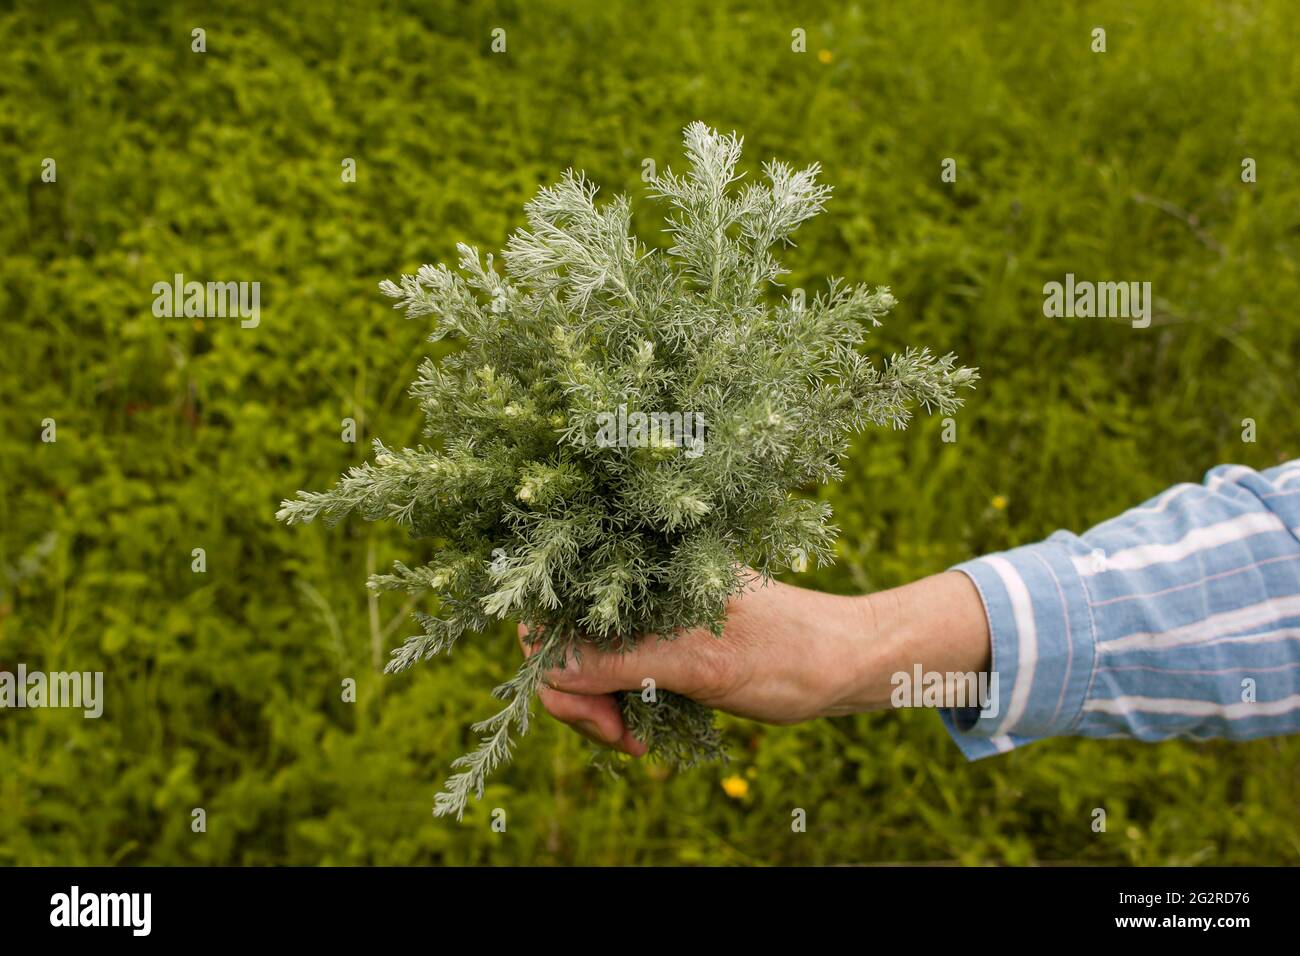 Female hands hold on to branches with leaves of Tauric wormwood. Artemisia taurica Willd, absinthe wormwood is a natural hygiene product. Stock Photo